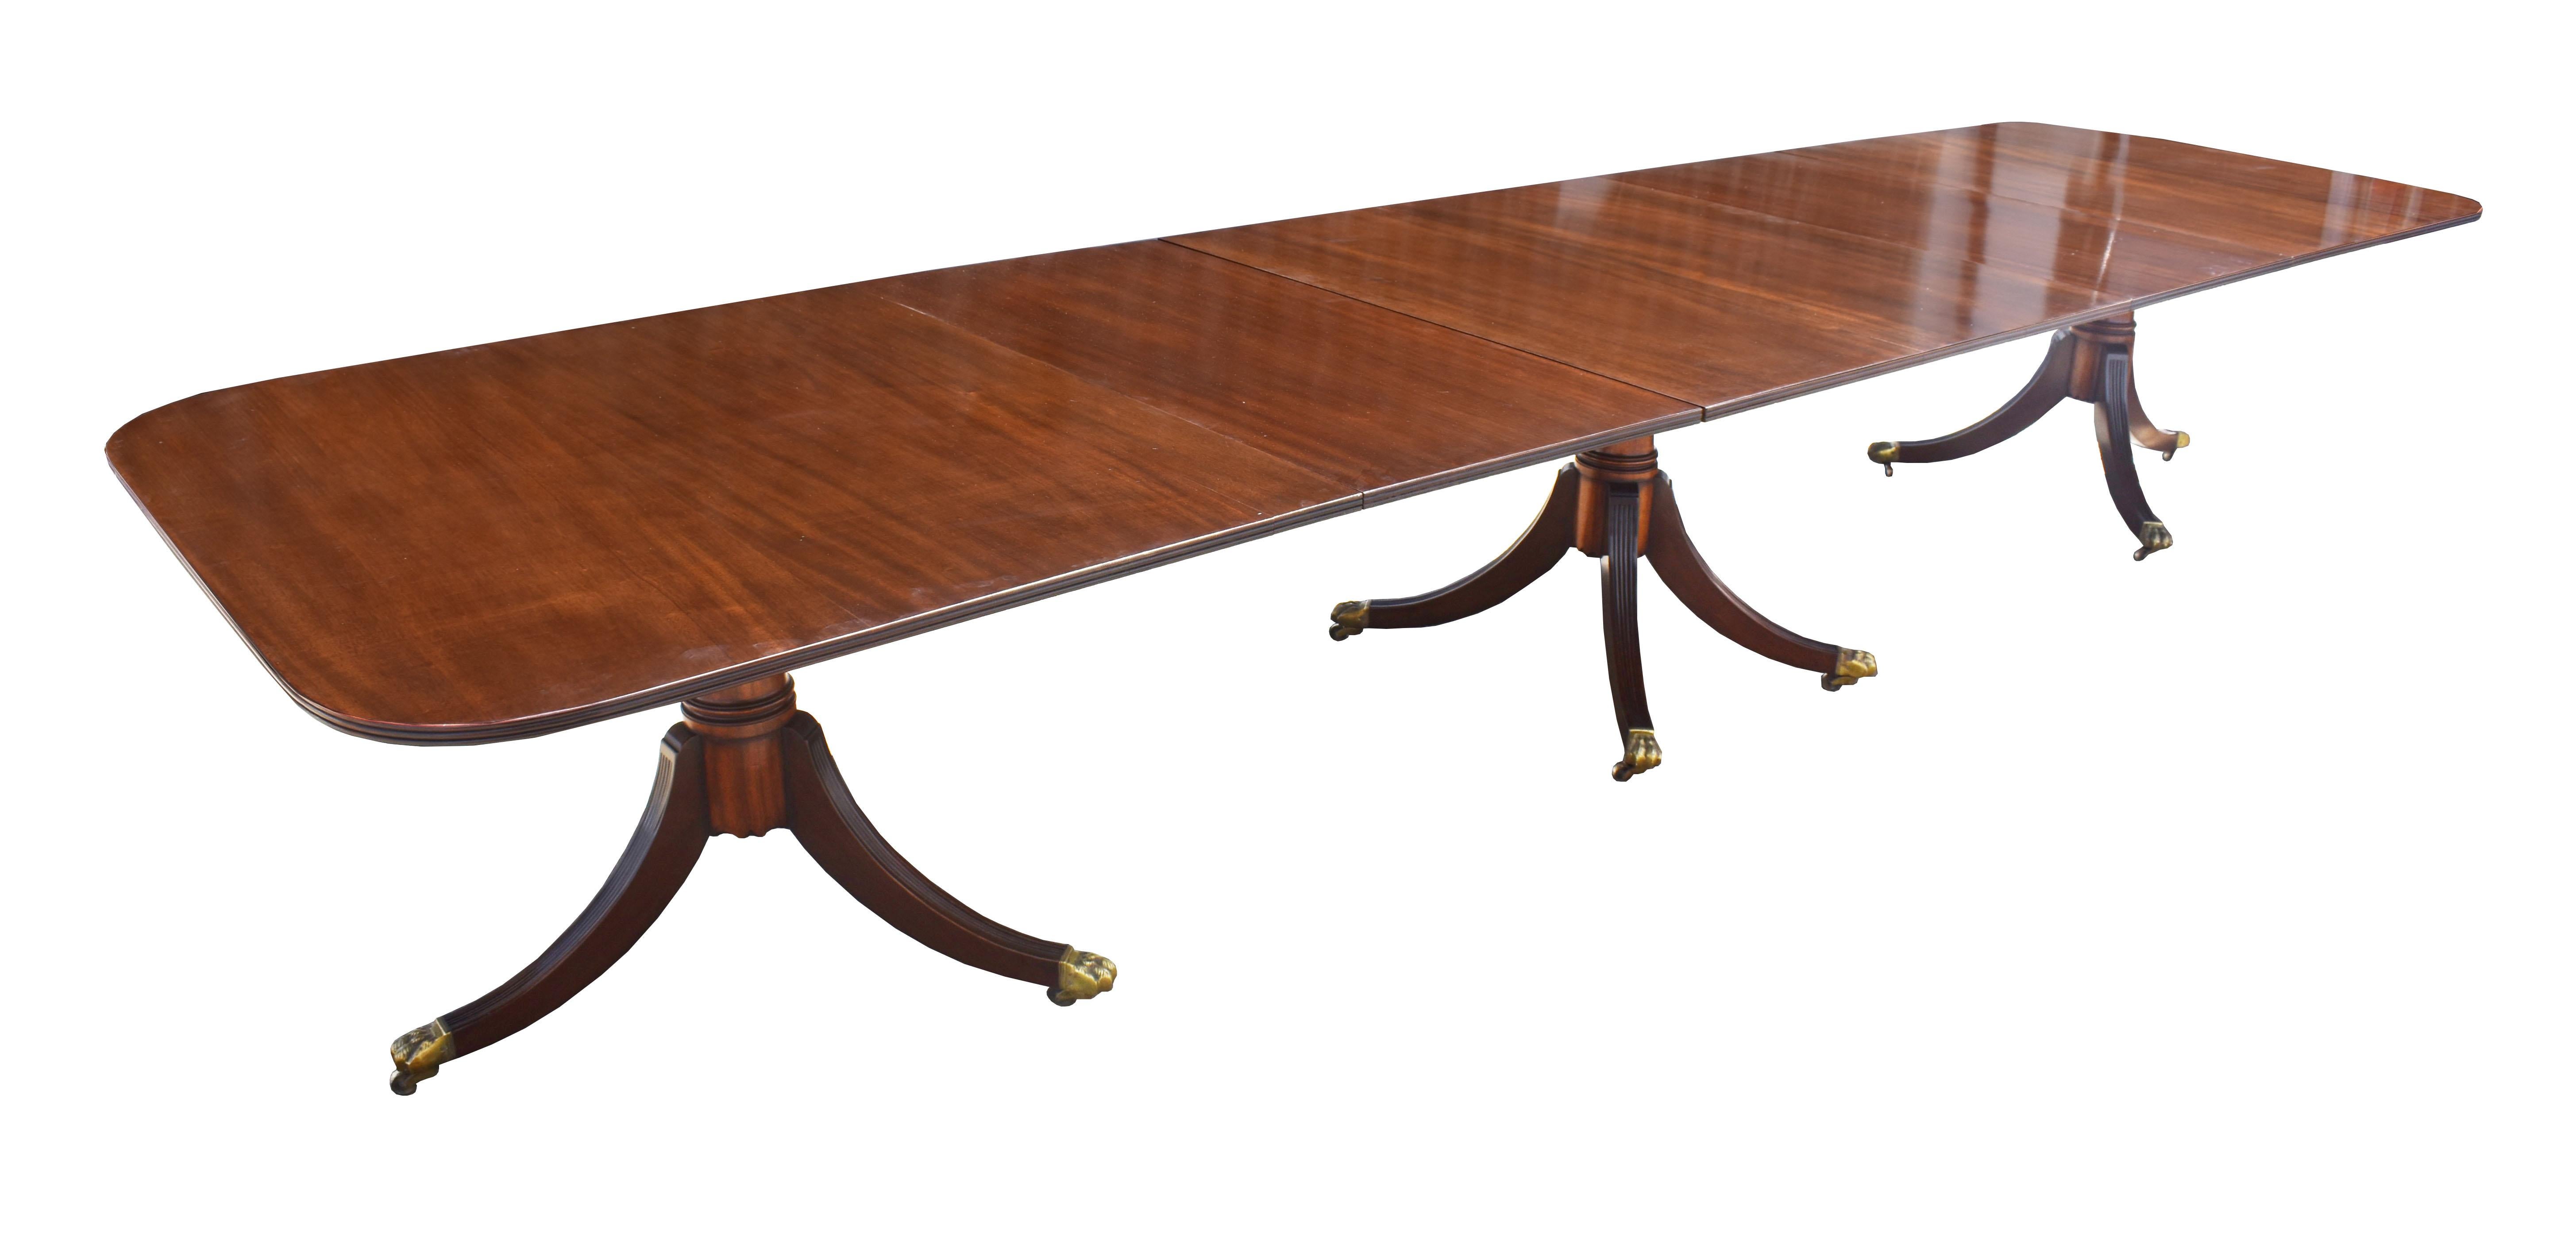 For sale is a good quality antique Regency style solid mahogany pedestal dining table, complete with two additional leaves, the table stands on three turned pedestals, with splayed legs terminating on brass lions paw castors. The table is in very